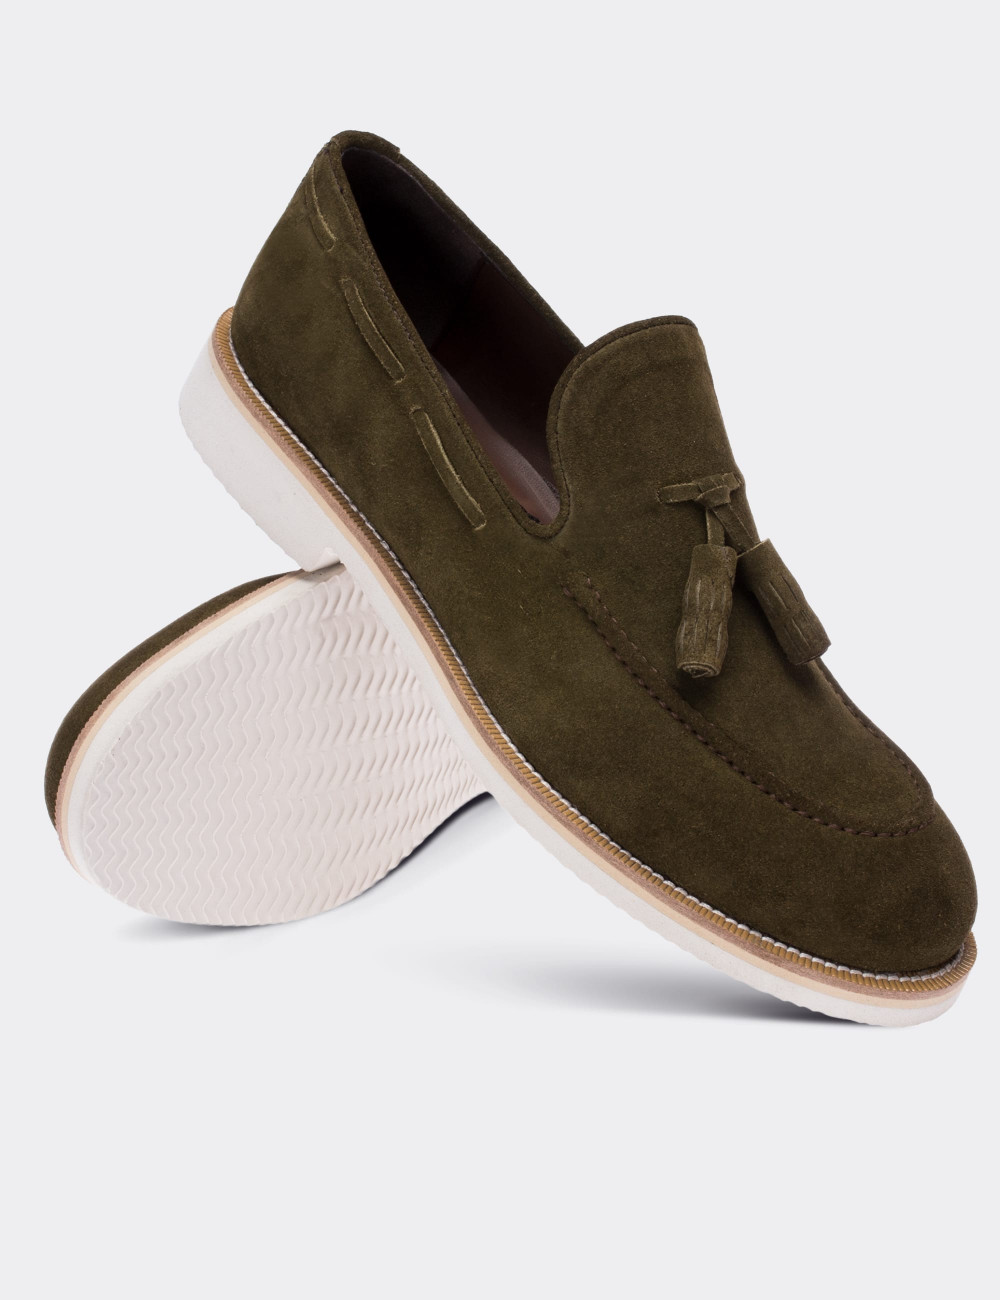 Green Suede Leather Loafers Shoes - 01319MYSLE03